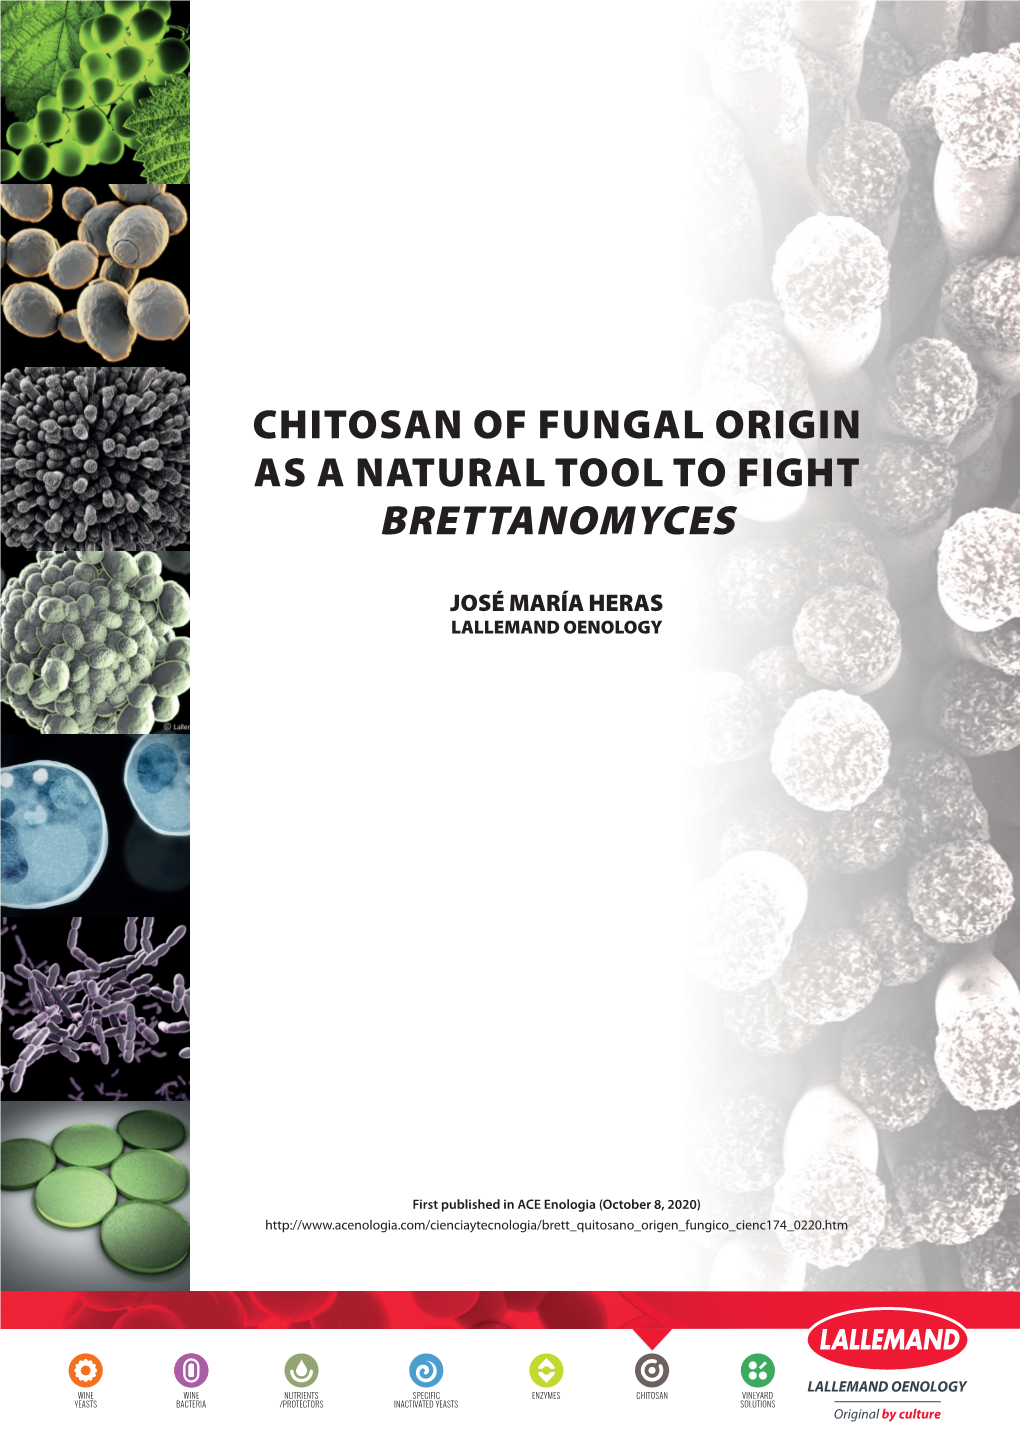 Chitosan of Fungal Origin As a Natural Tool to Fight Brettanomyces